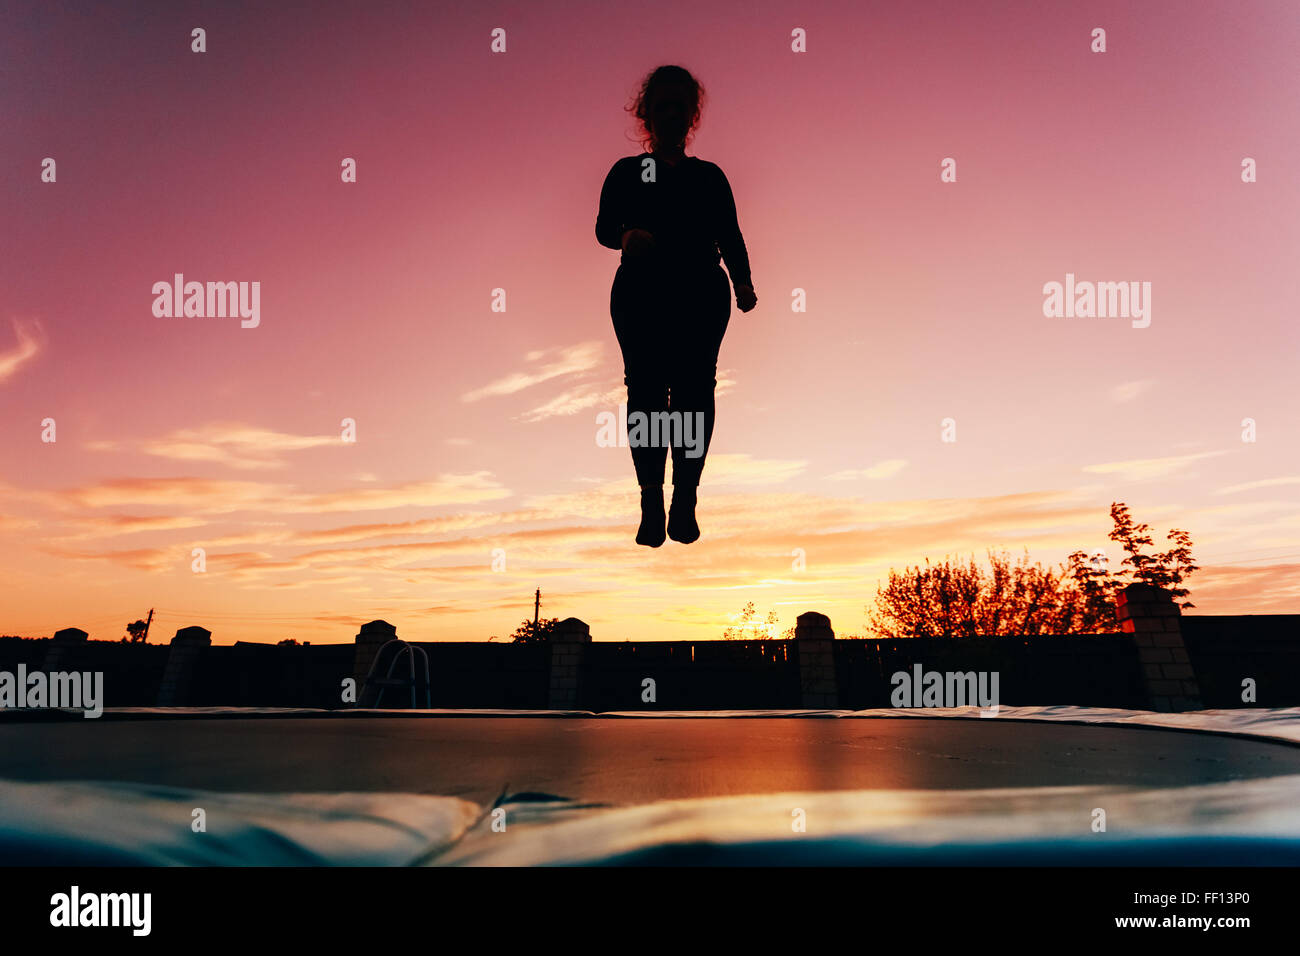 Silhouette Of Beautiful Plus Size Young Woman Girl Jumping On Trampoline On Evening Blue Sky Background Stock Photo